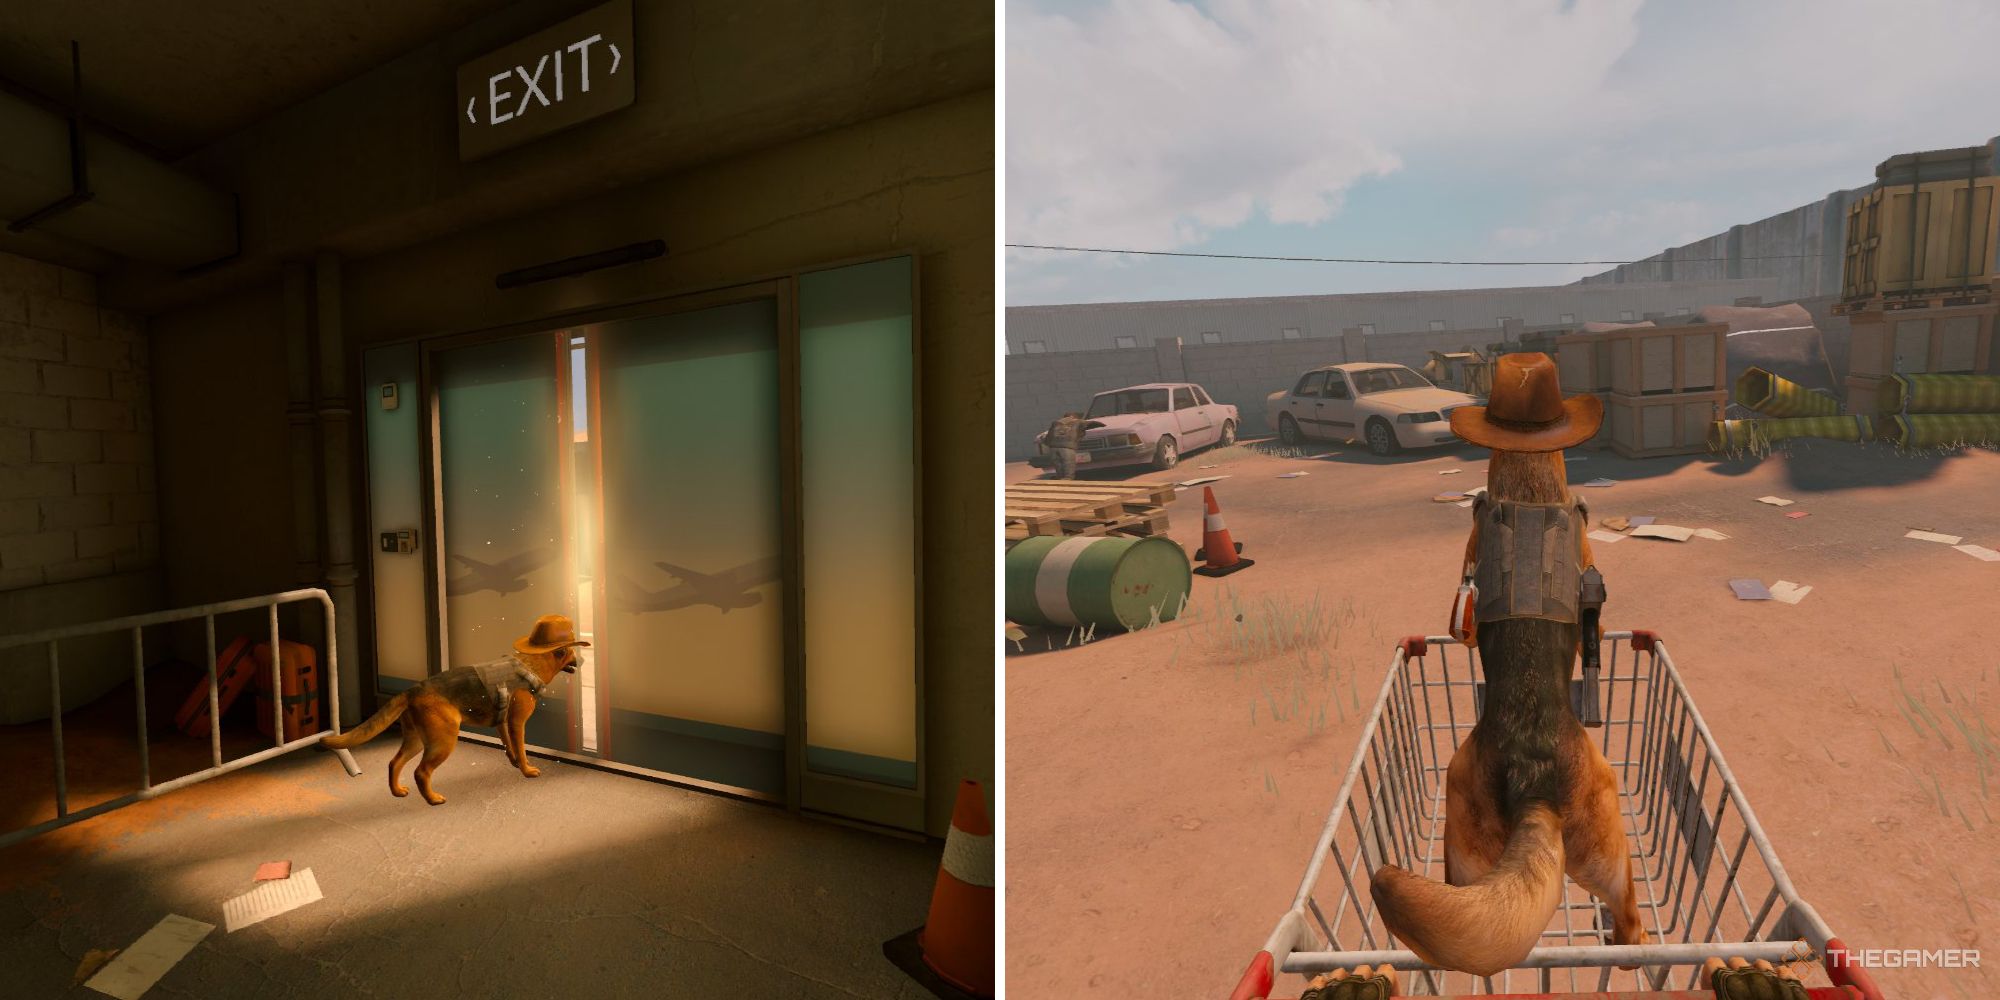 Arizona Sunshine 2 gameplay of Buddy the dog by an exit door and Buddy in a shopping cart